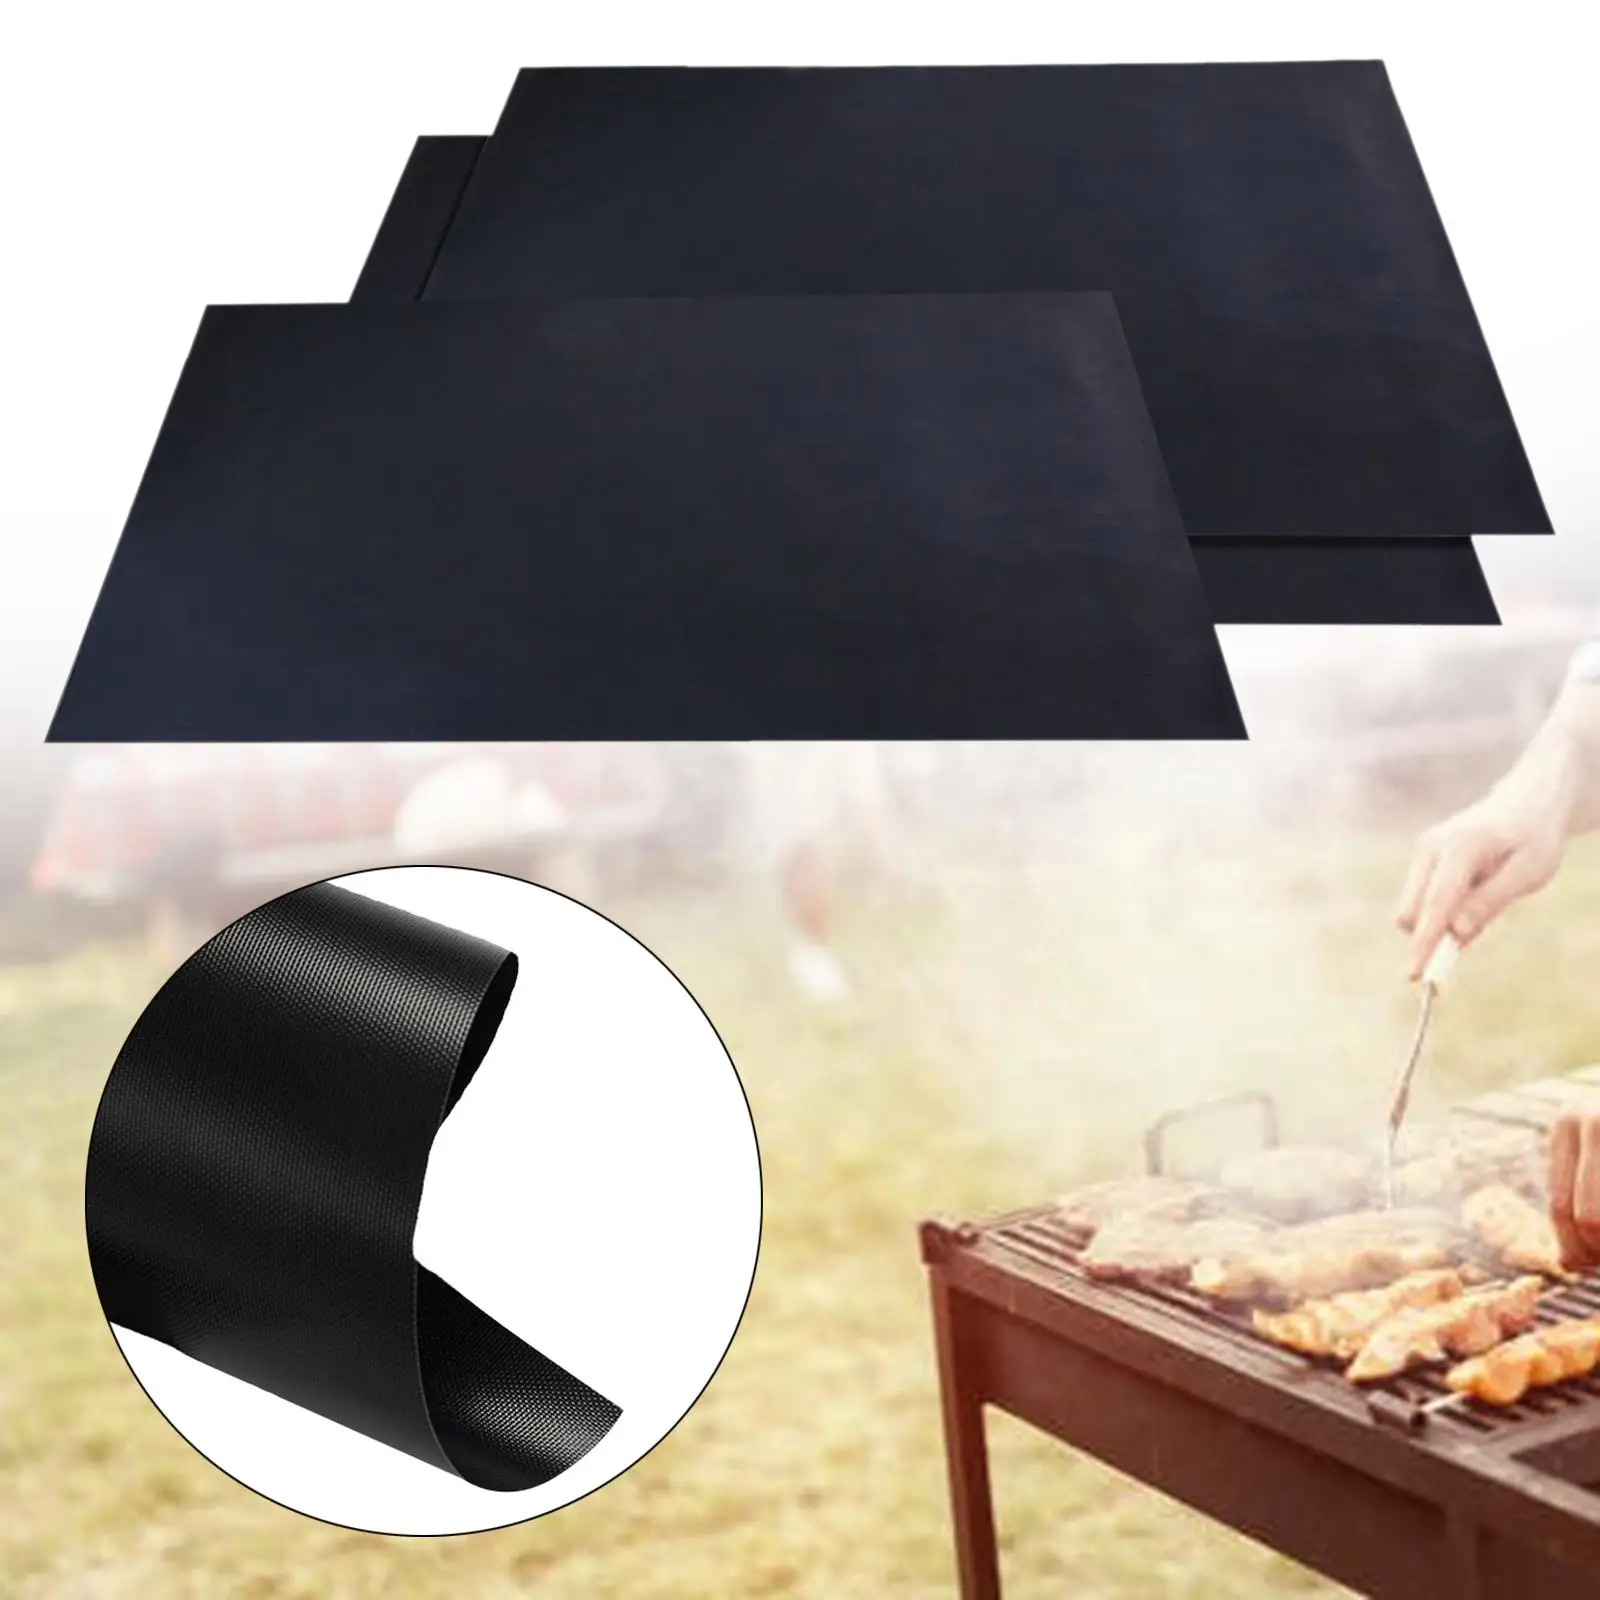 3 Pieces Baking Sheet Pan Liners for Kitchen Camping Outdoor